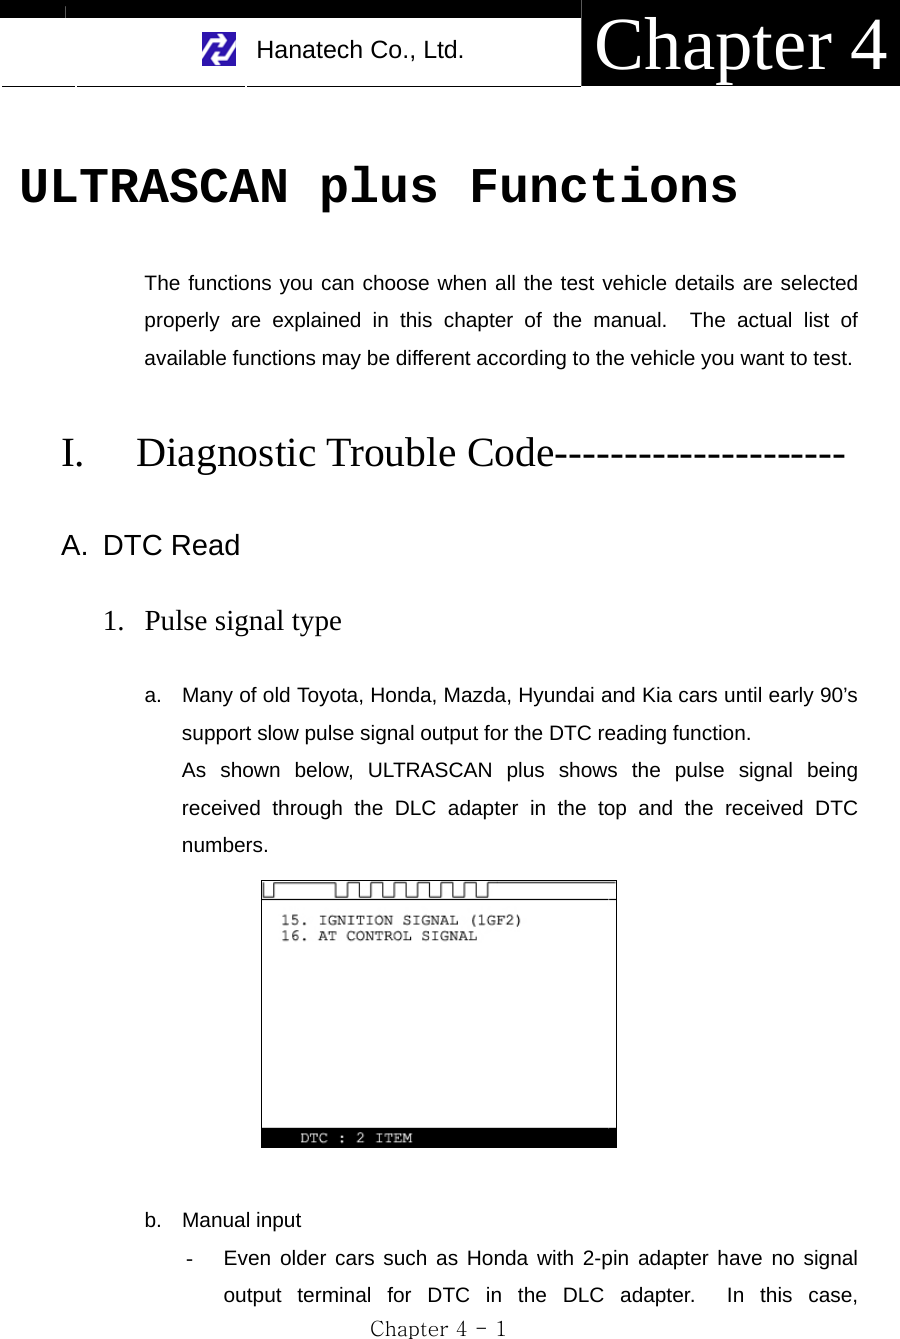     Hanatech Co., Ltd.  Chapter 4 Chapter 4 - 1  ULTRASCAN plus Functions  The functions you can choose when all the test vehicle details are selected properly are explained in this chapter of the manual.  The actual list of available functions may be different according to the vehicle you want to test.    I. Diagnostic Trouble Code---------------------  A. DTC Read  1. Pulse signal type  a.  Many of old Toyota, Honda, Mazda, Hyundai and Kia cars until early 90’s support slow pulse signal output for the DTC reading function. As shown below, ULTRASCAN plus shows the pulse signal being received through the DLC adapter in the top and the received DTC numbers.   b. Manual input -  Even older cars such as Honda with 2-pin adapter have no signal output terminal for DTC in the DLC adapter.  In this case, 